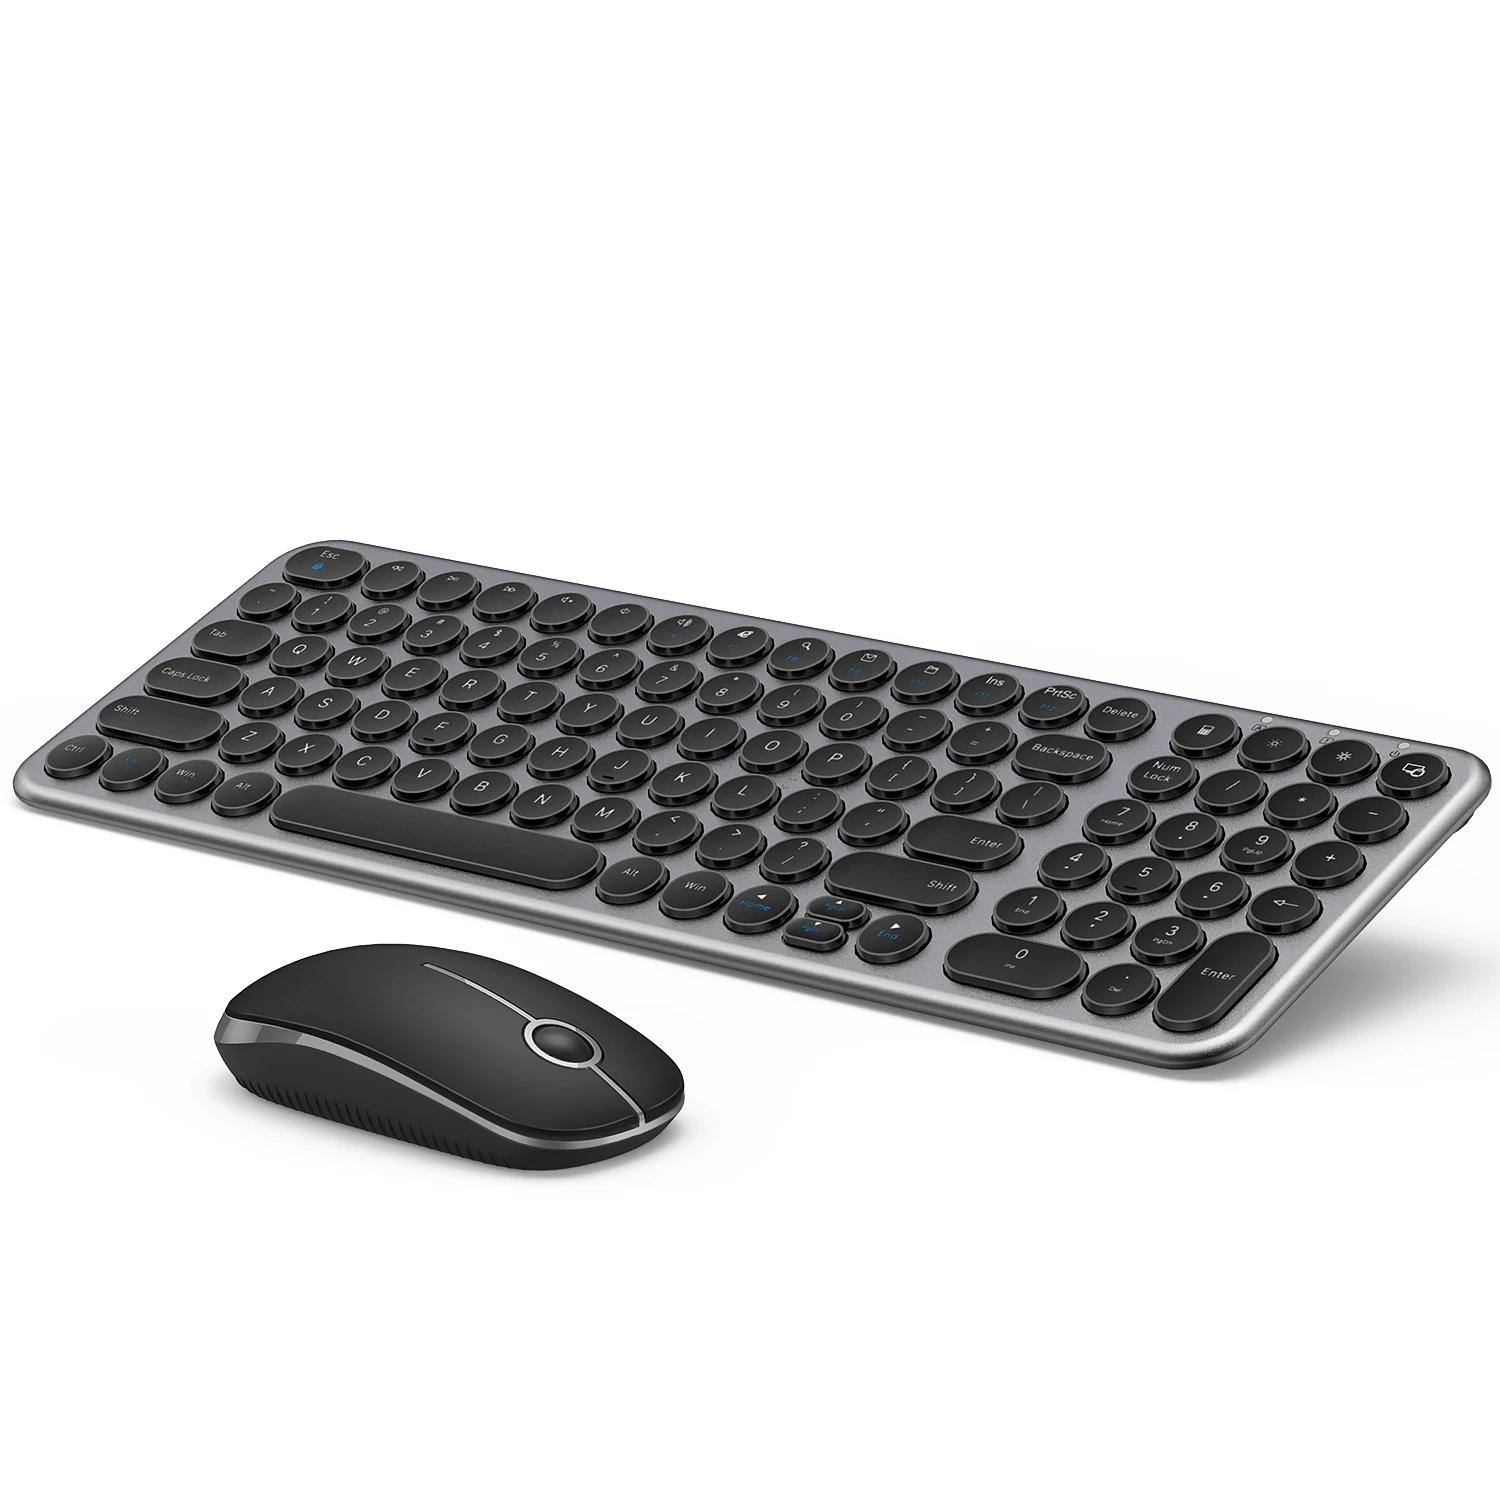 And Mouse Combo 2.4g Slim Ergonomic Quiet Keyboard And Mouse With Round Keys For Windows Laptop Pc